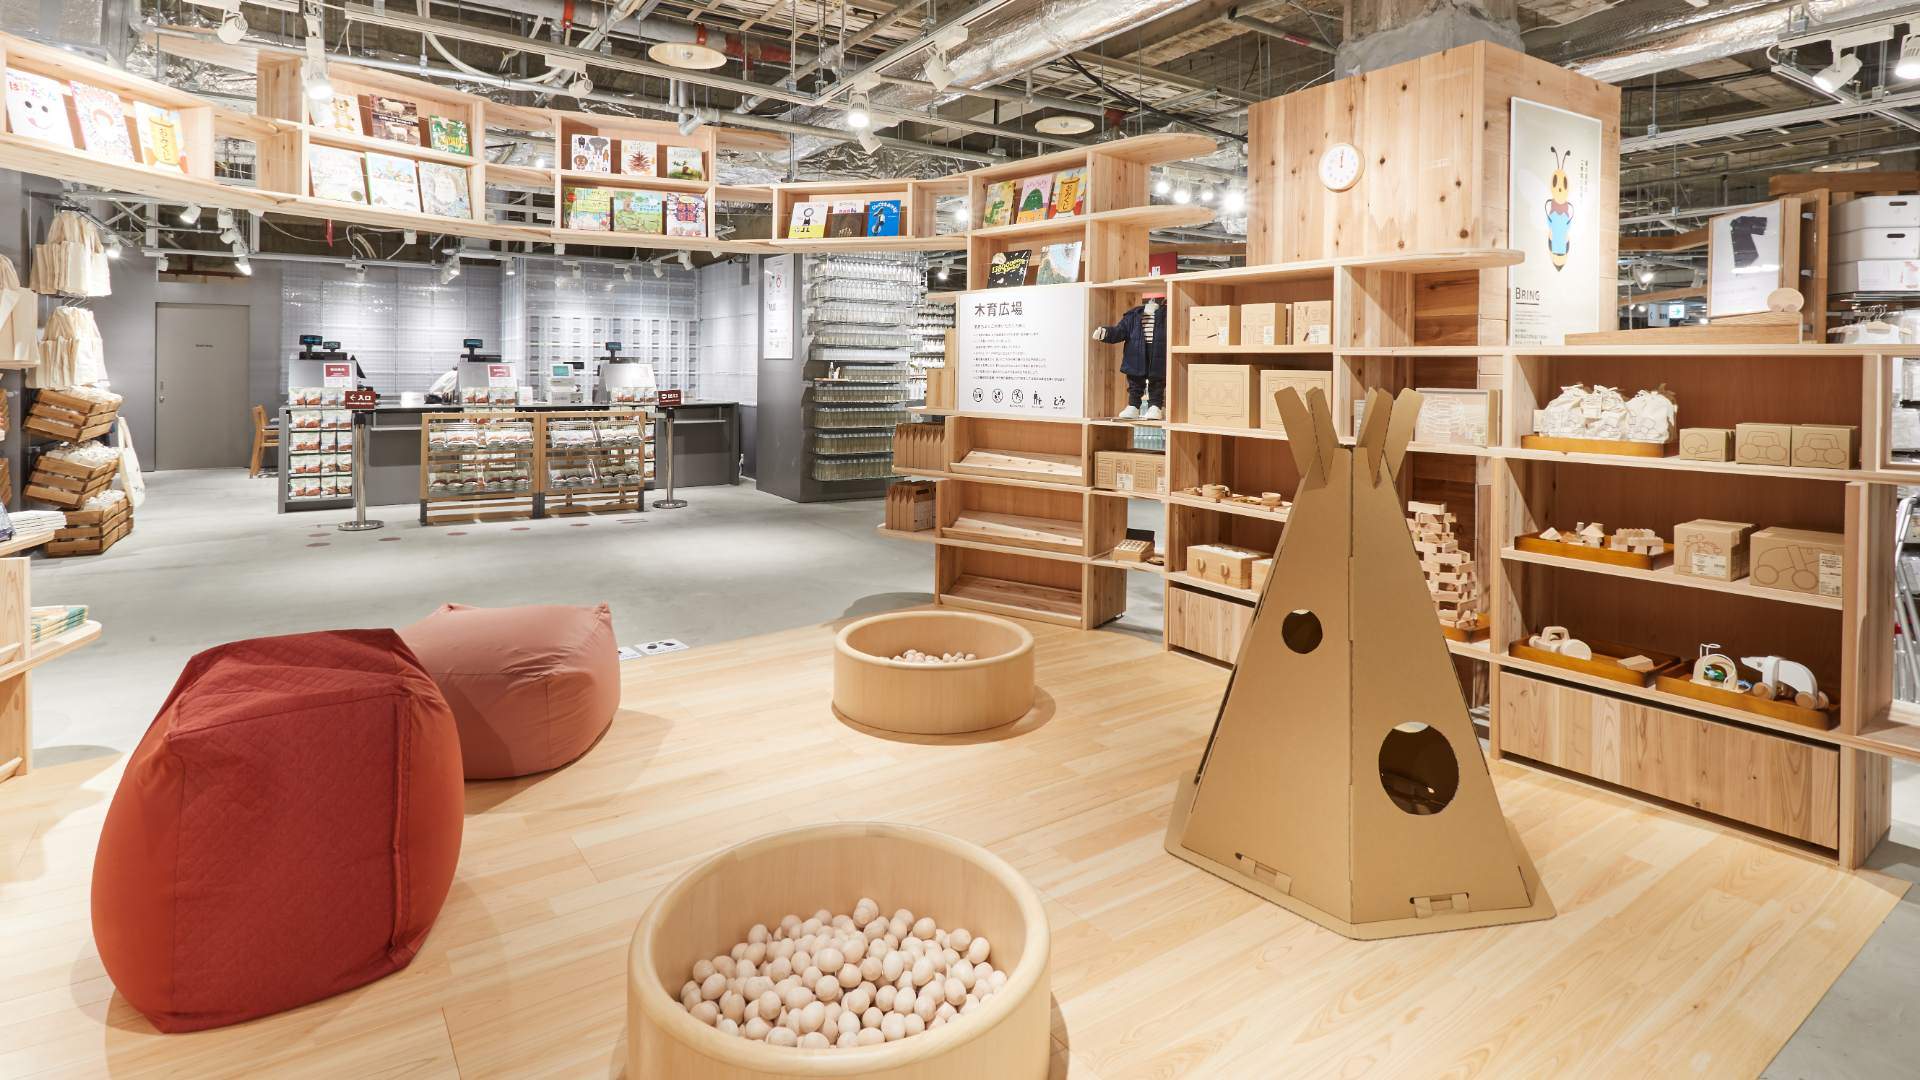 Chadstone Will Soon Be Home to Australia's First Ever Muji 'Concept' Store